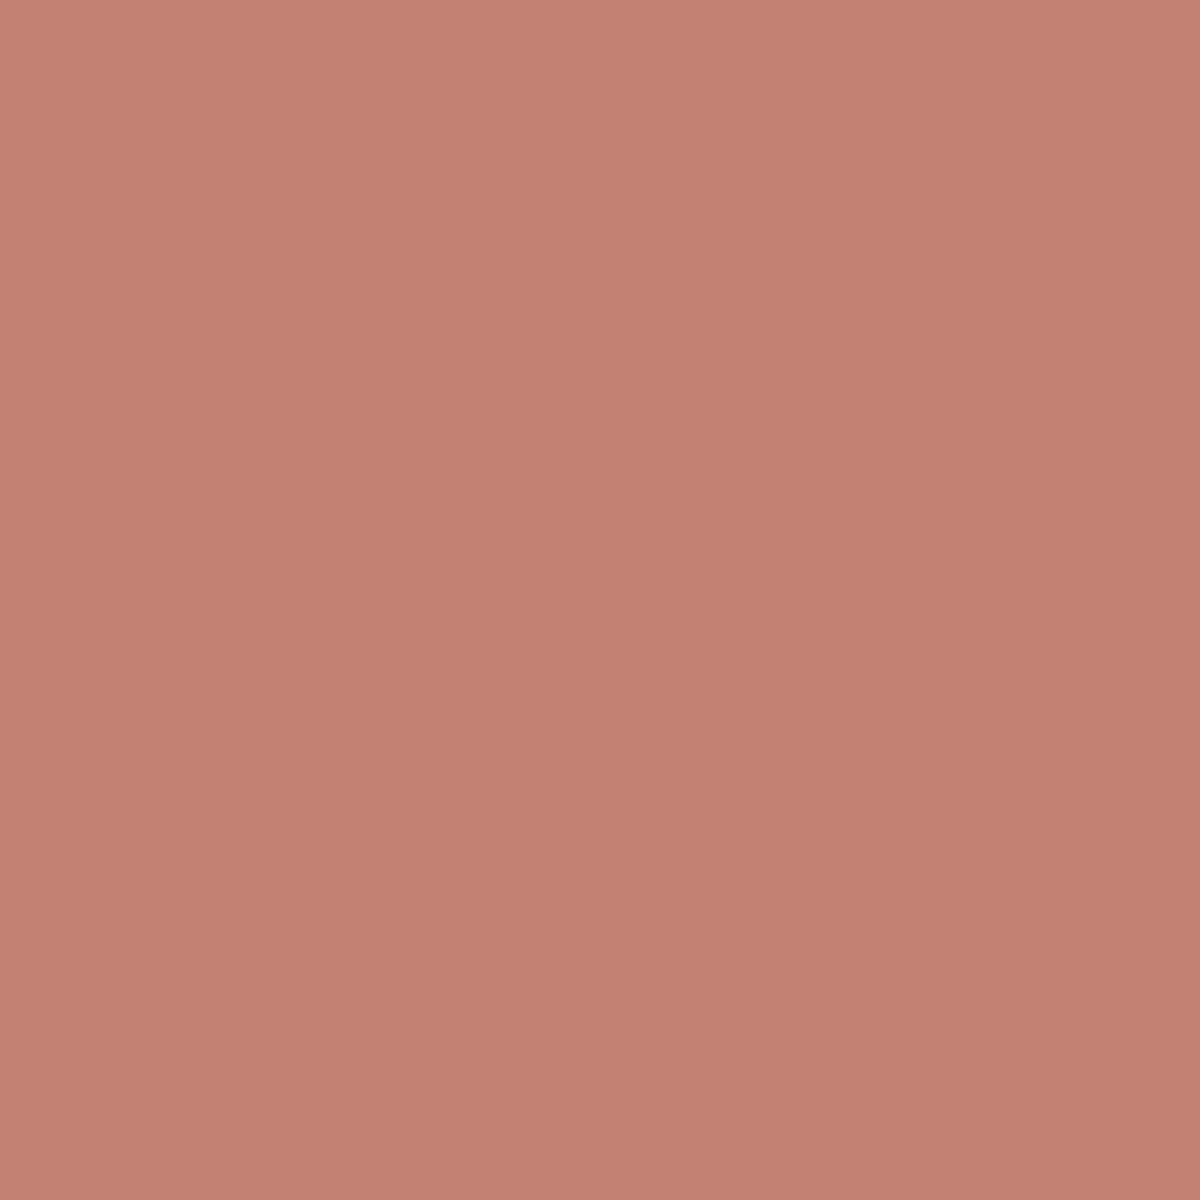 Swatch of curry, a curry brown